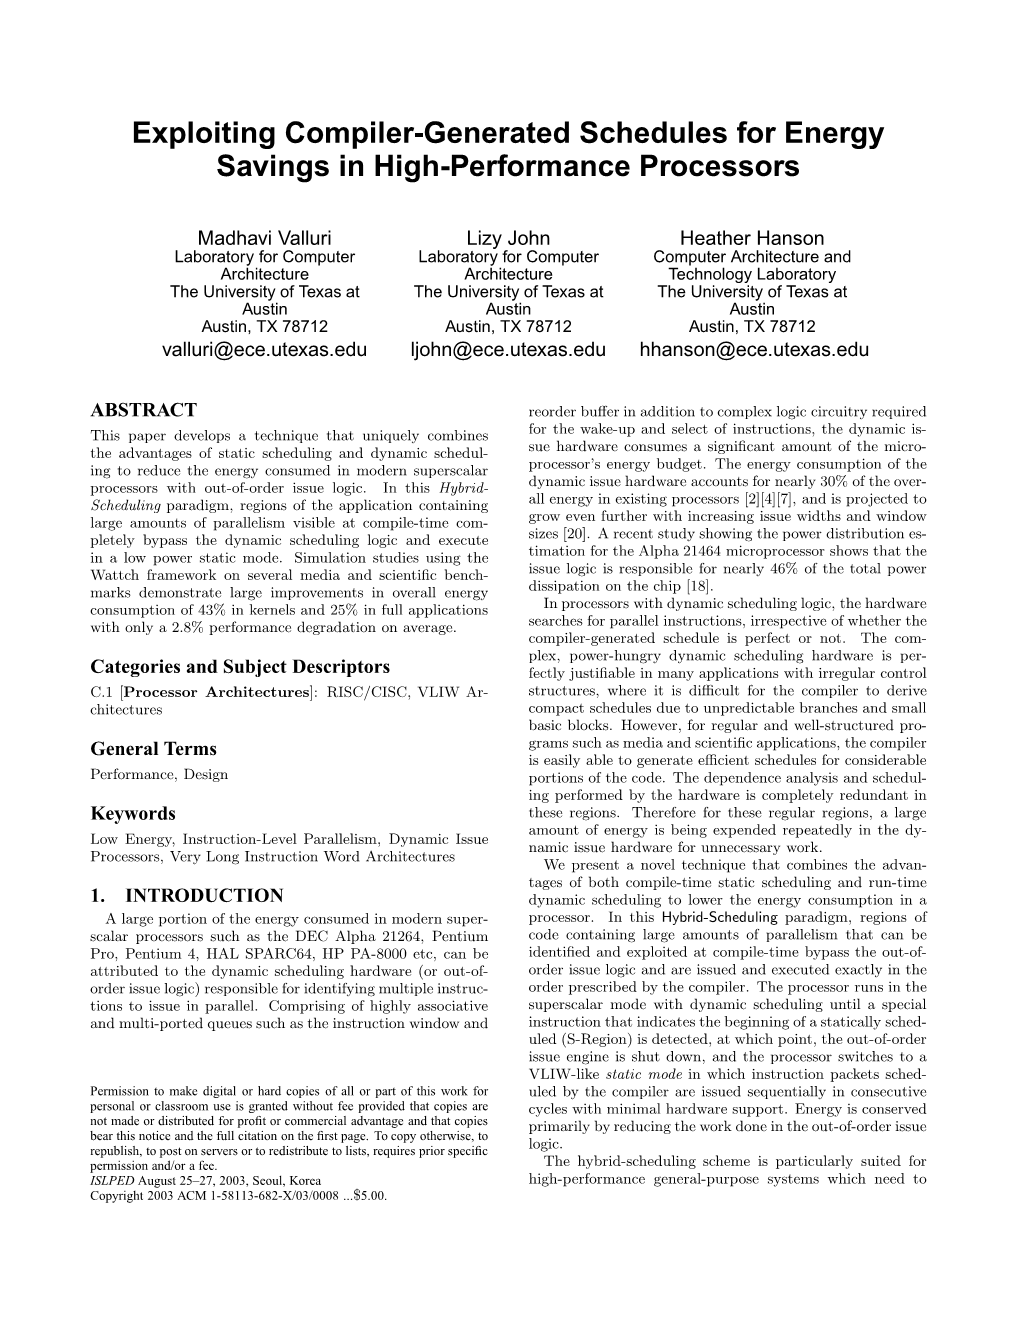 Exploiting Compiler-Generated Schedules for Energy Savings in High-Performance Processors